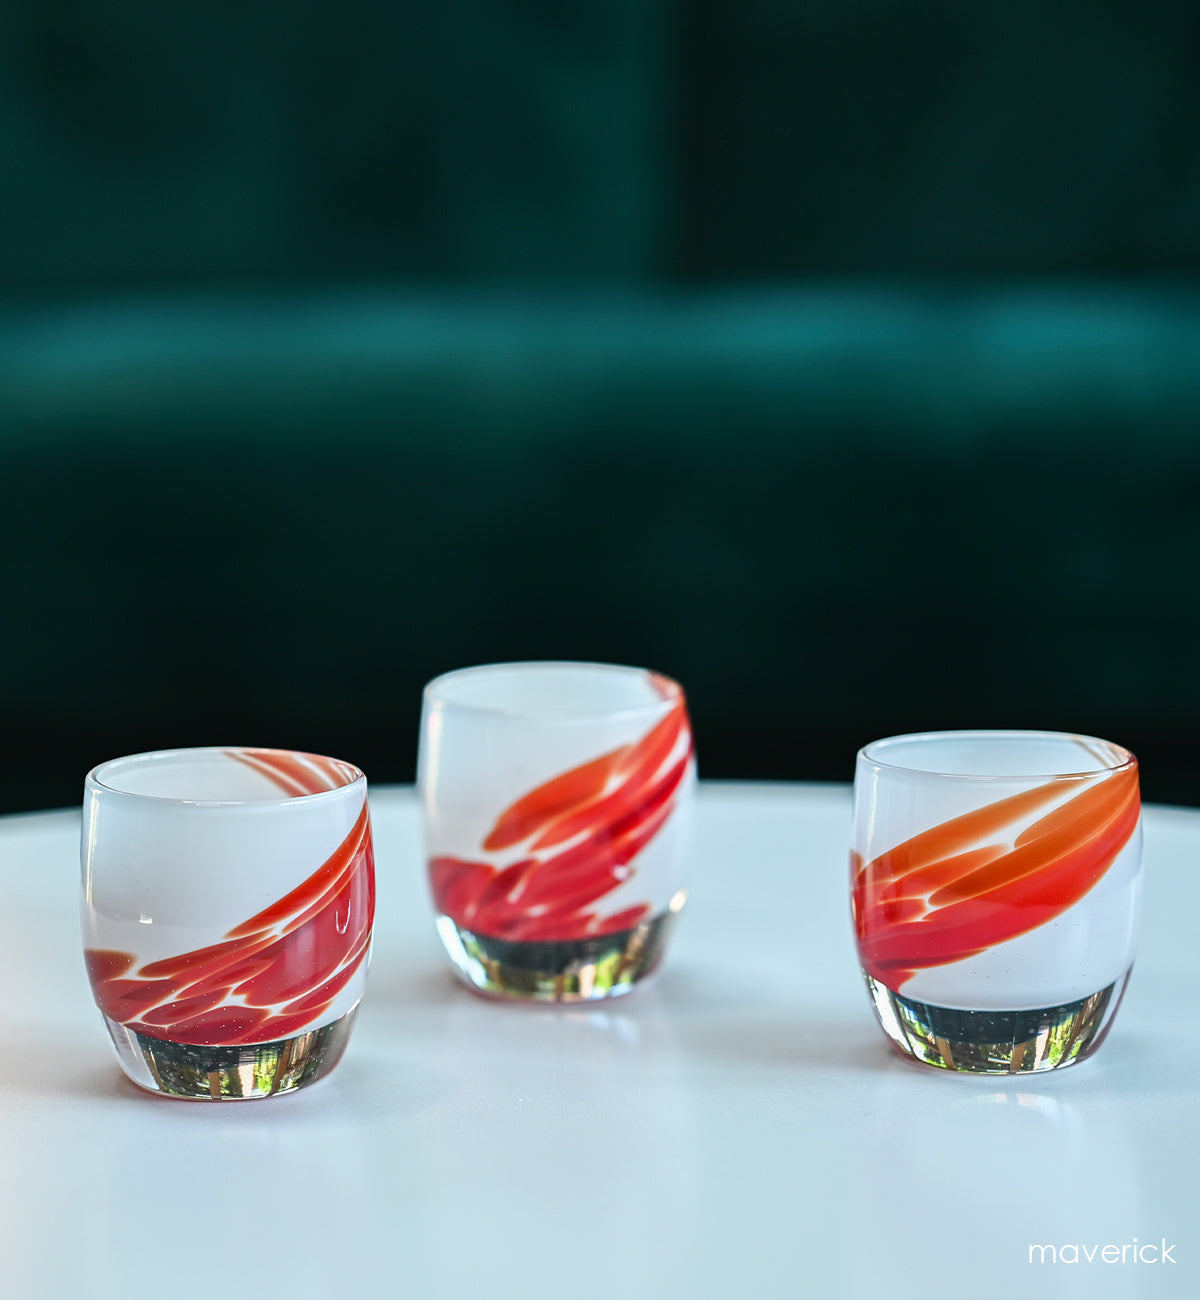 white and red patterned hand-blown glass candle holder.